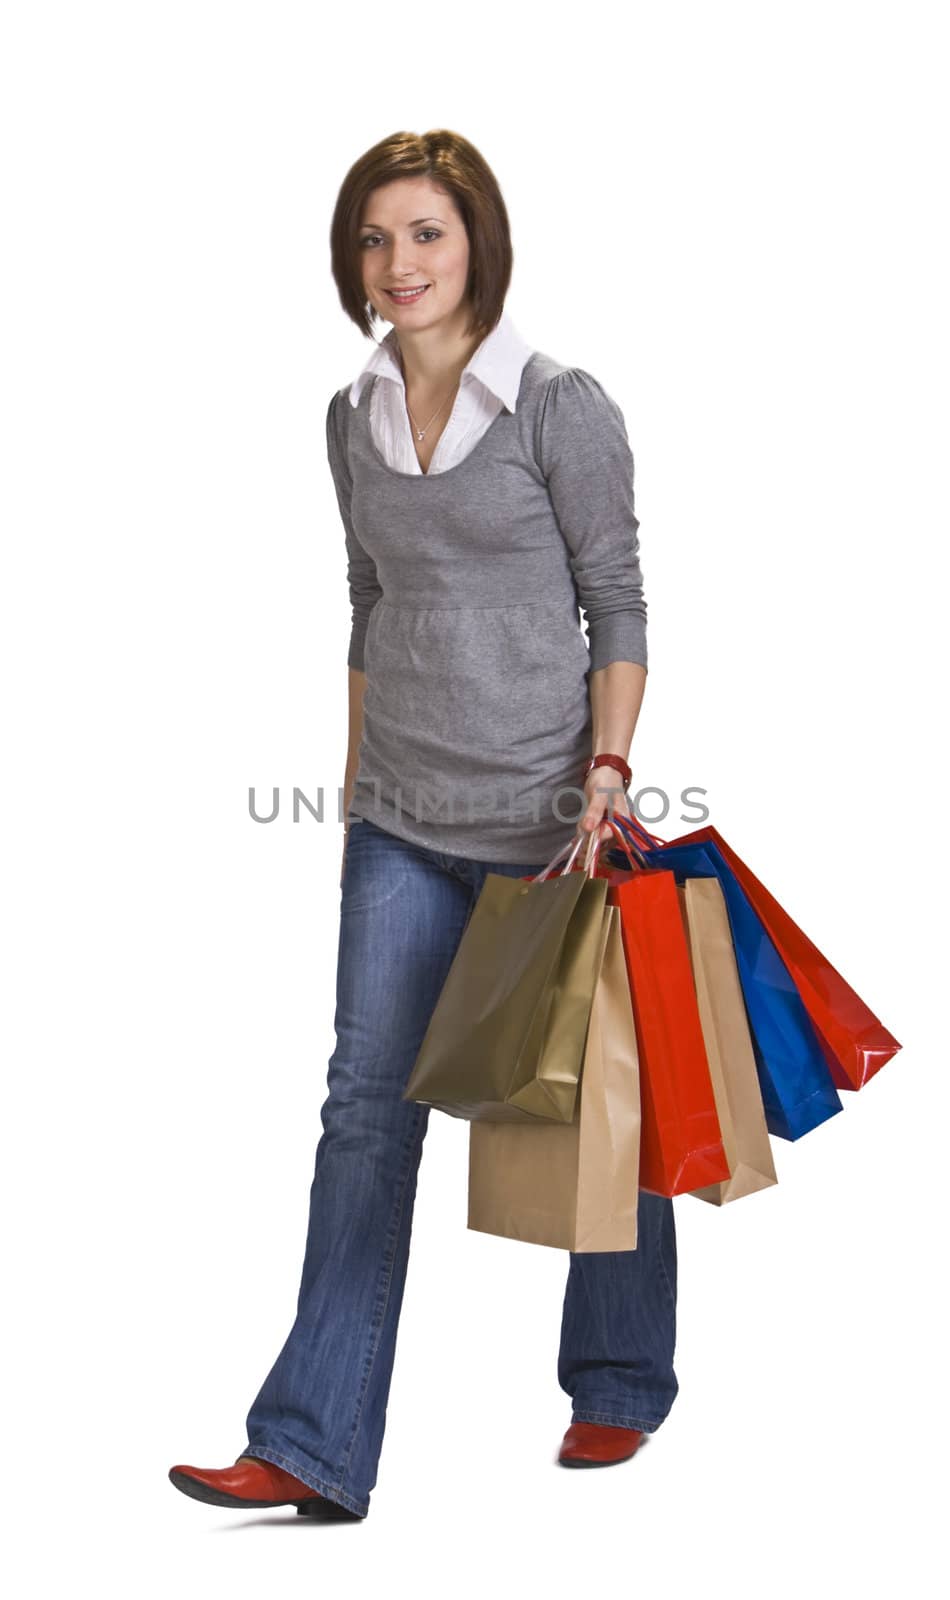 Woman with shopping bags walking,isolated against a white background.